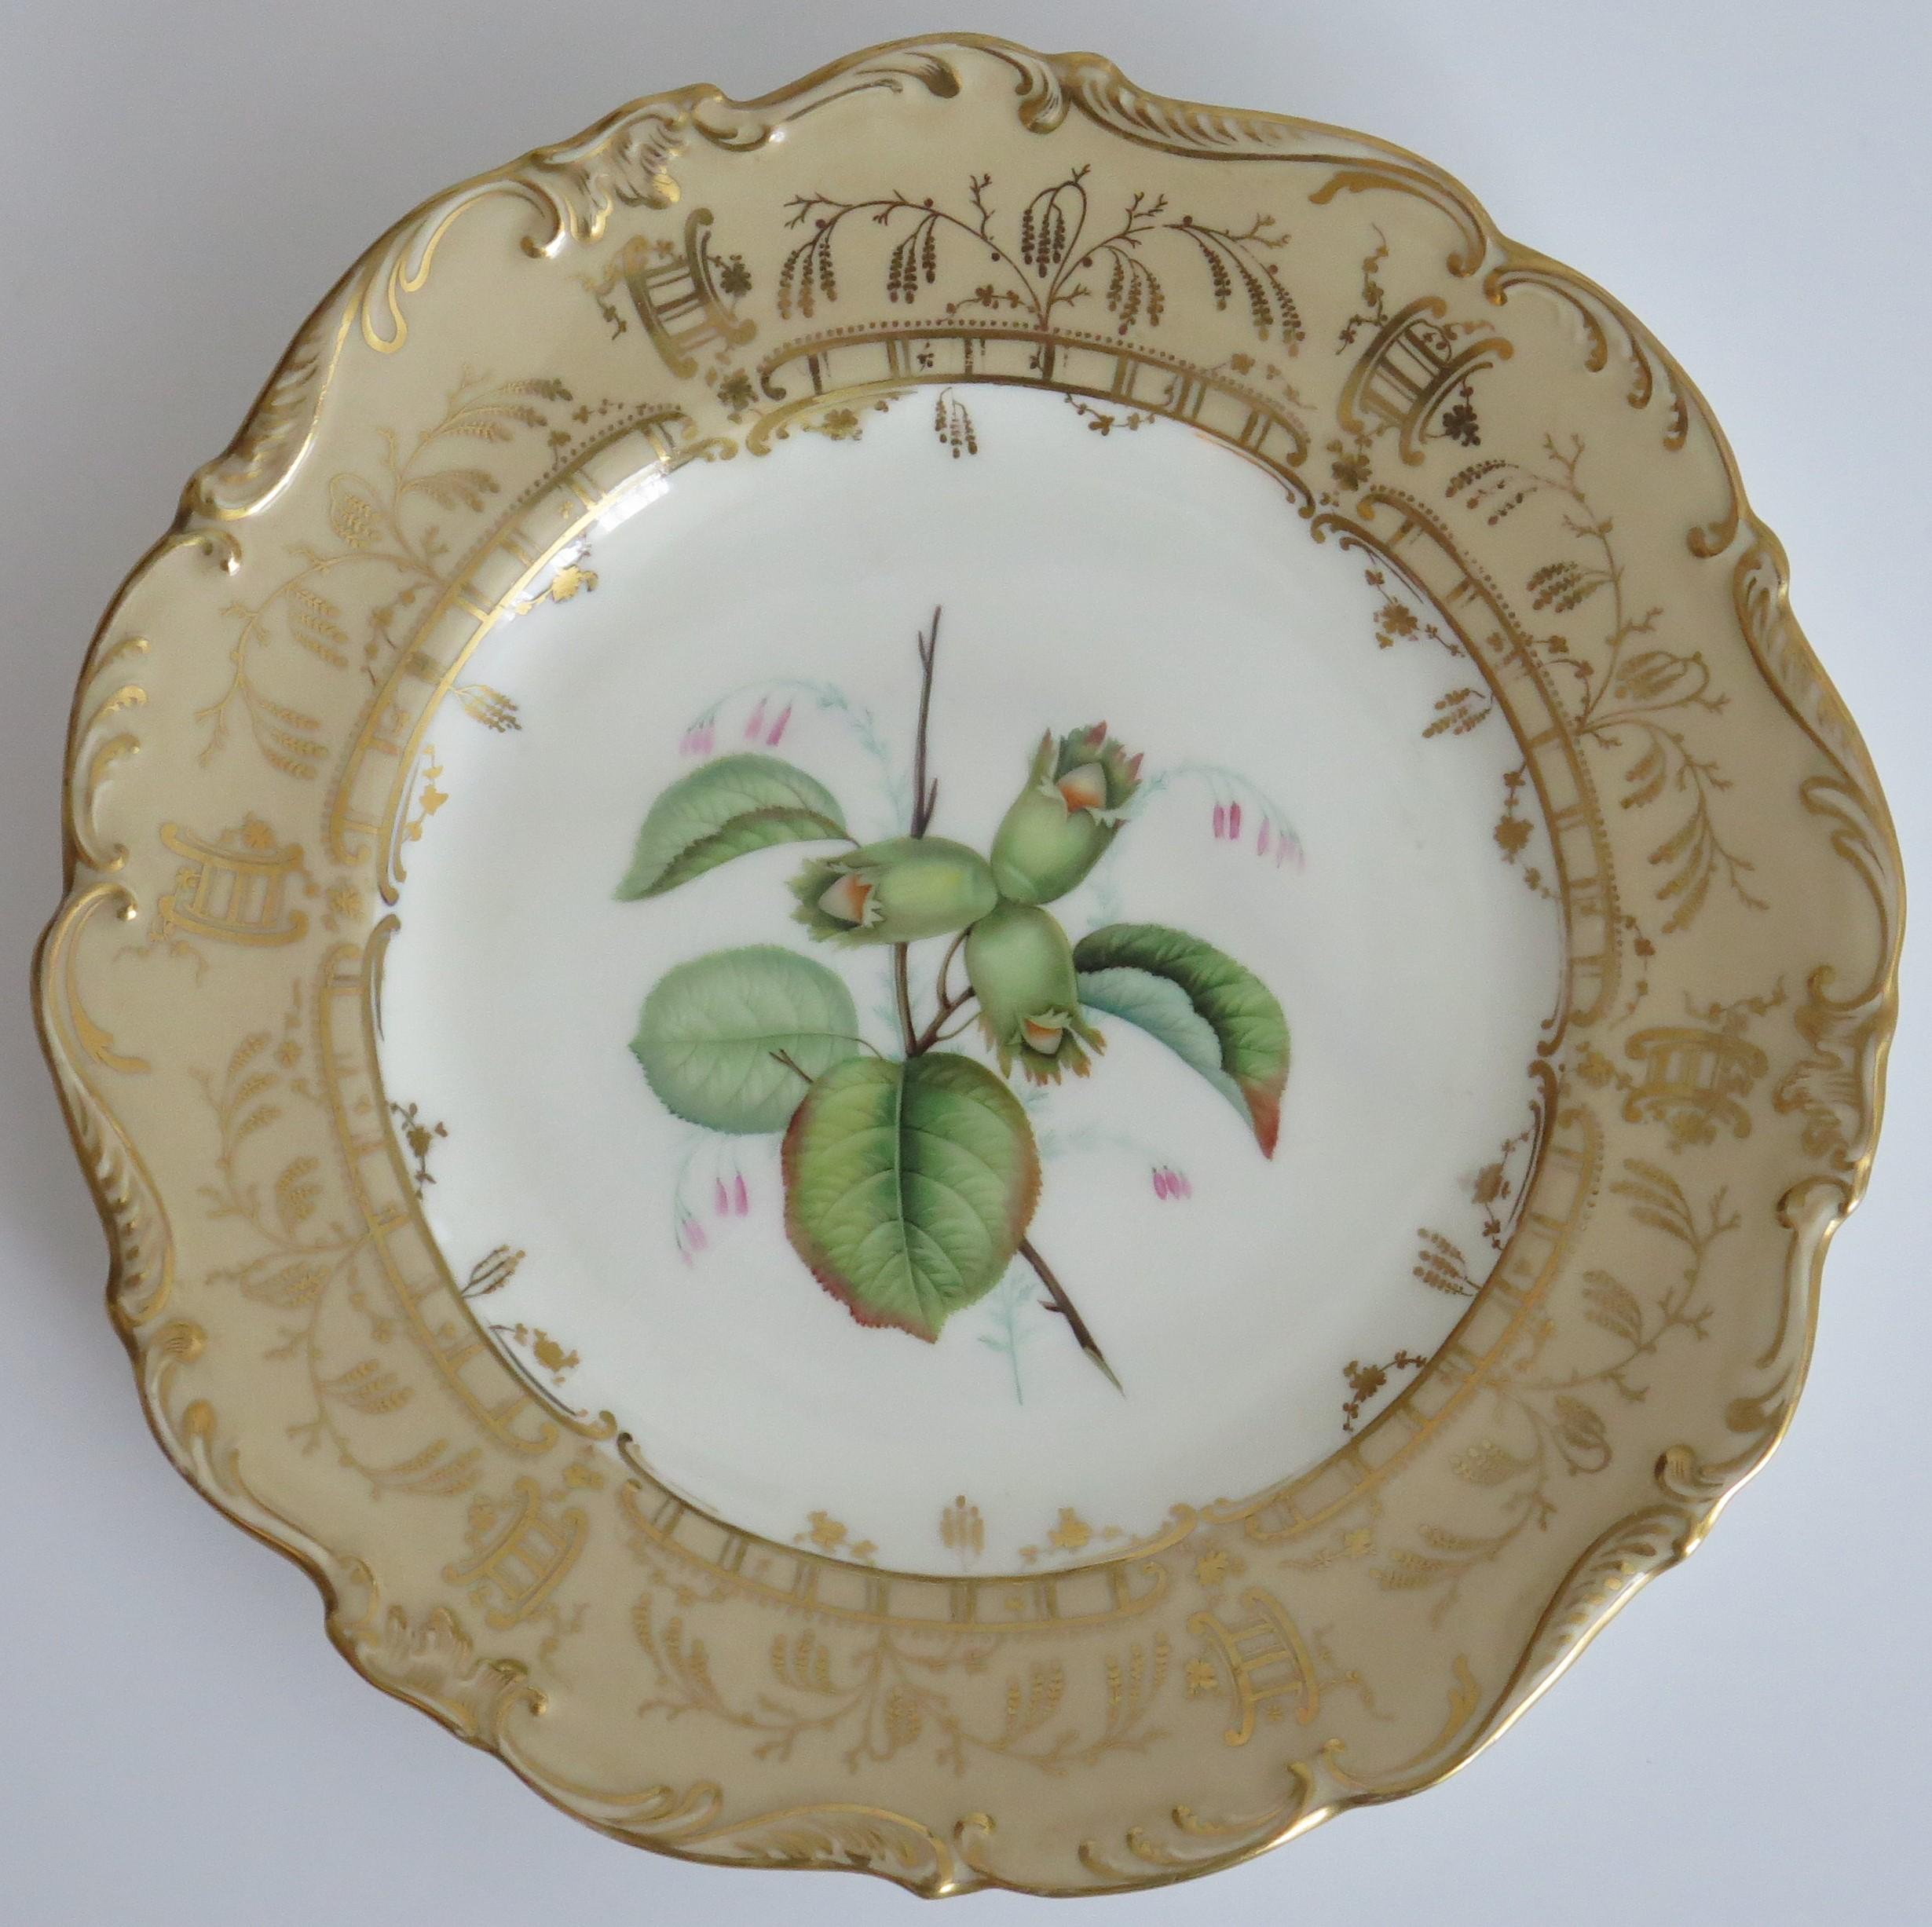 This is a very high quality, finely hand painted botanical plate, that we attribute to H & R Daniel or Samuel Alcock, Staffordshire Potteries, England and dating to the early 19th century late Georgian period, circa 1830.

This plate is well